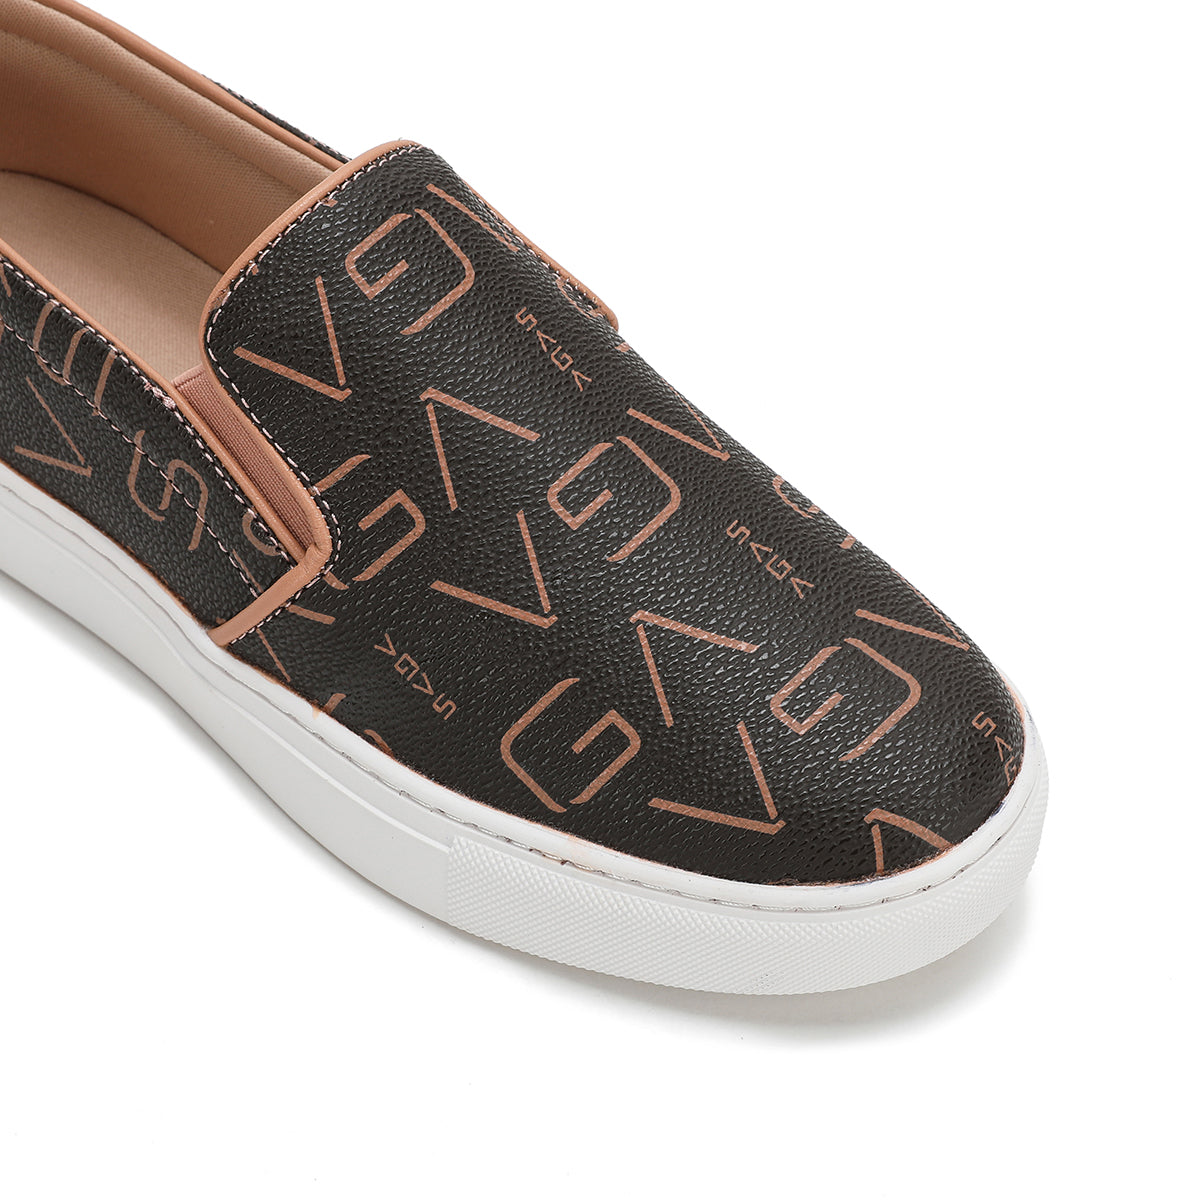 Saga Women's Light and Comfortable Microfiber Slip-On Shoes with Monogram Design in Coffee